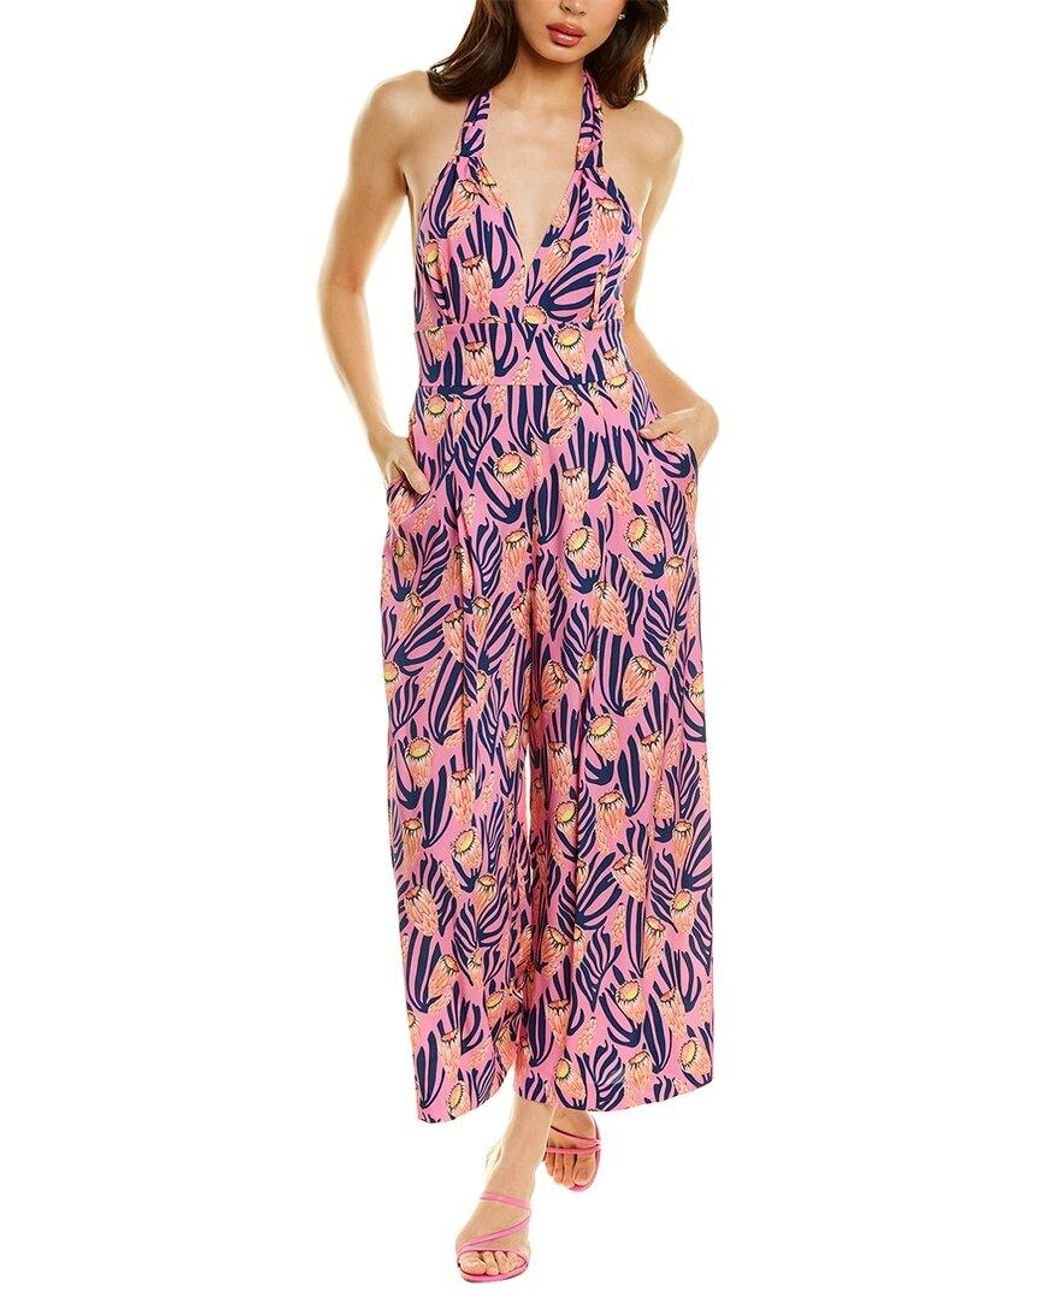 Aggregate more than 68 temperley london jumpsuit best